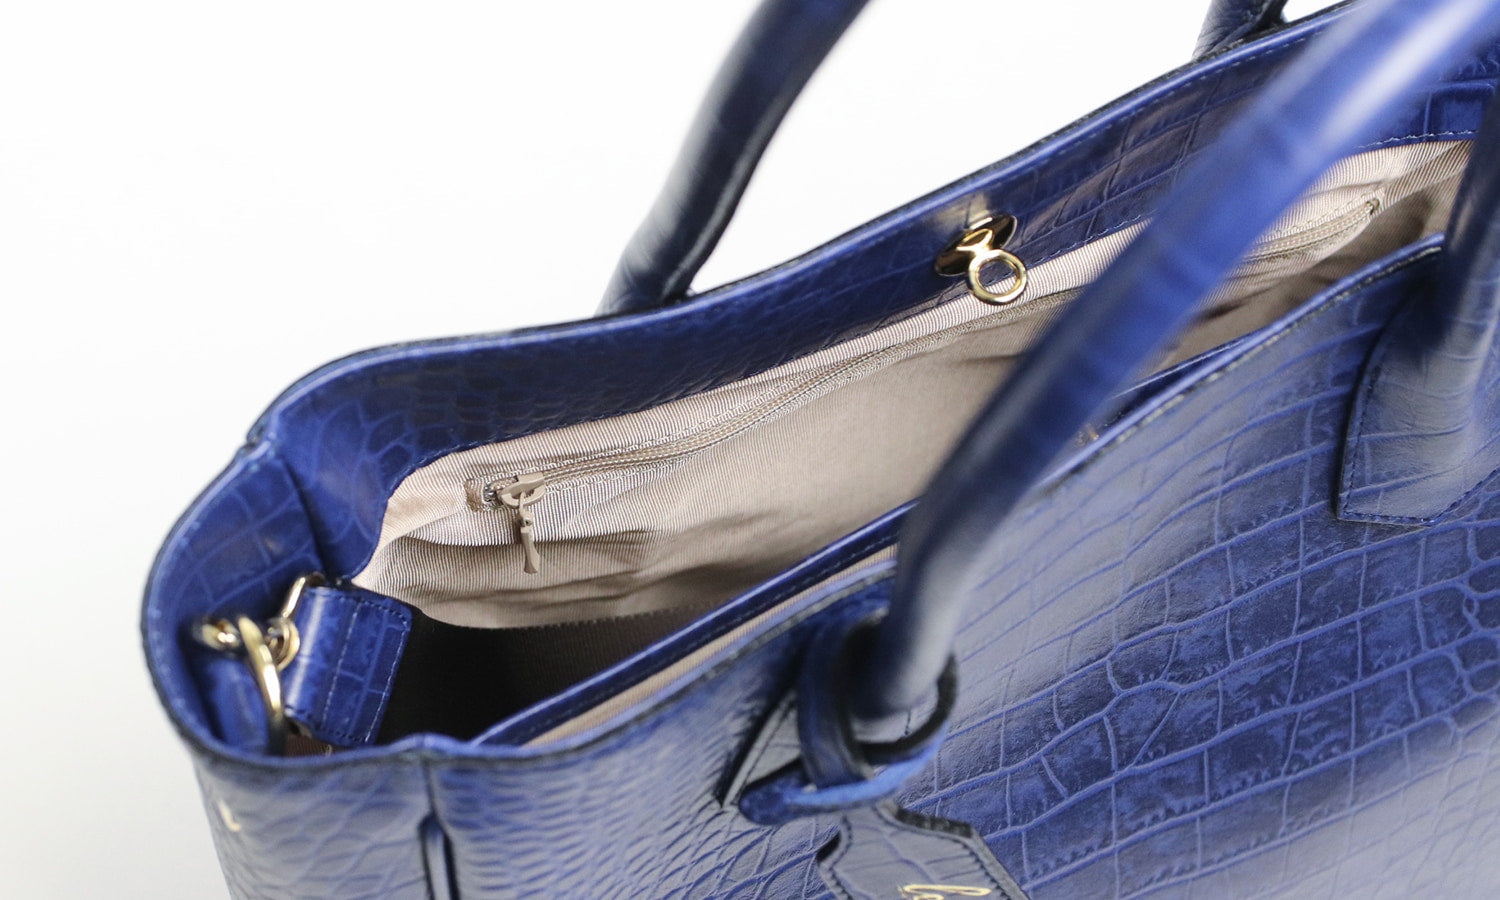 legu by LILY / Chroma A4 size square tote made of luxurious crocodile-embossed leather 